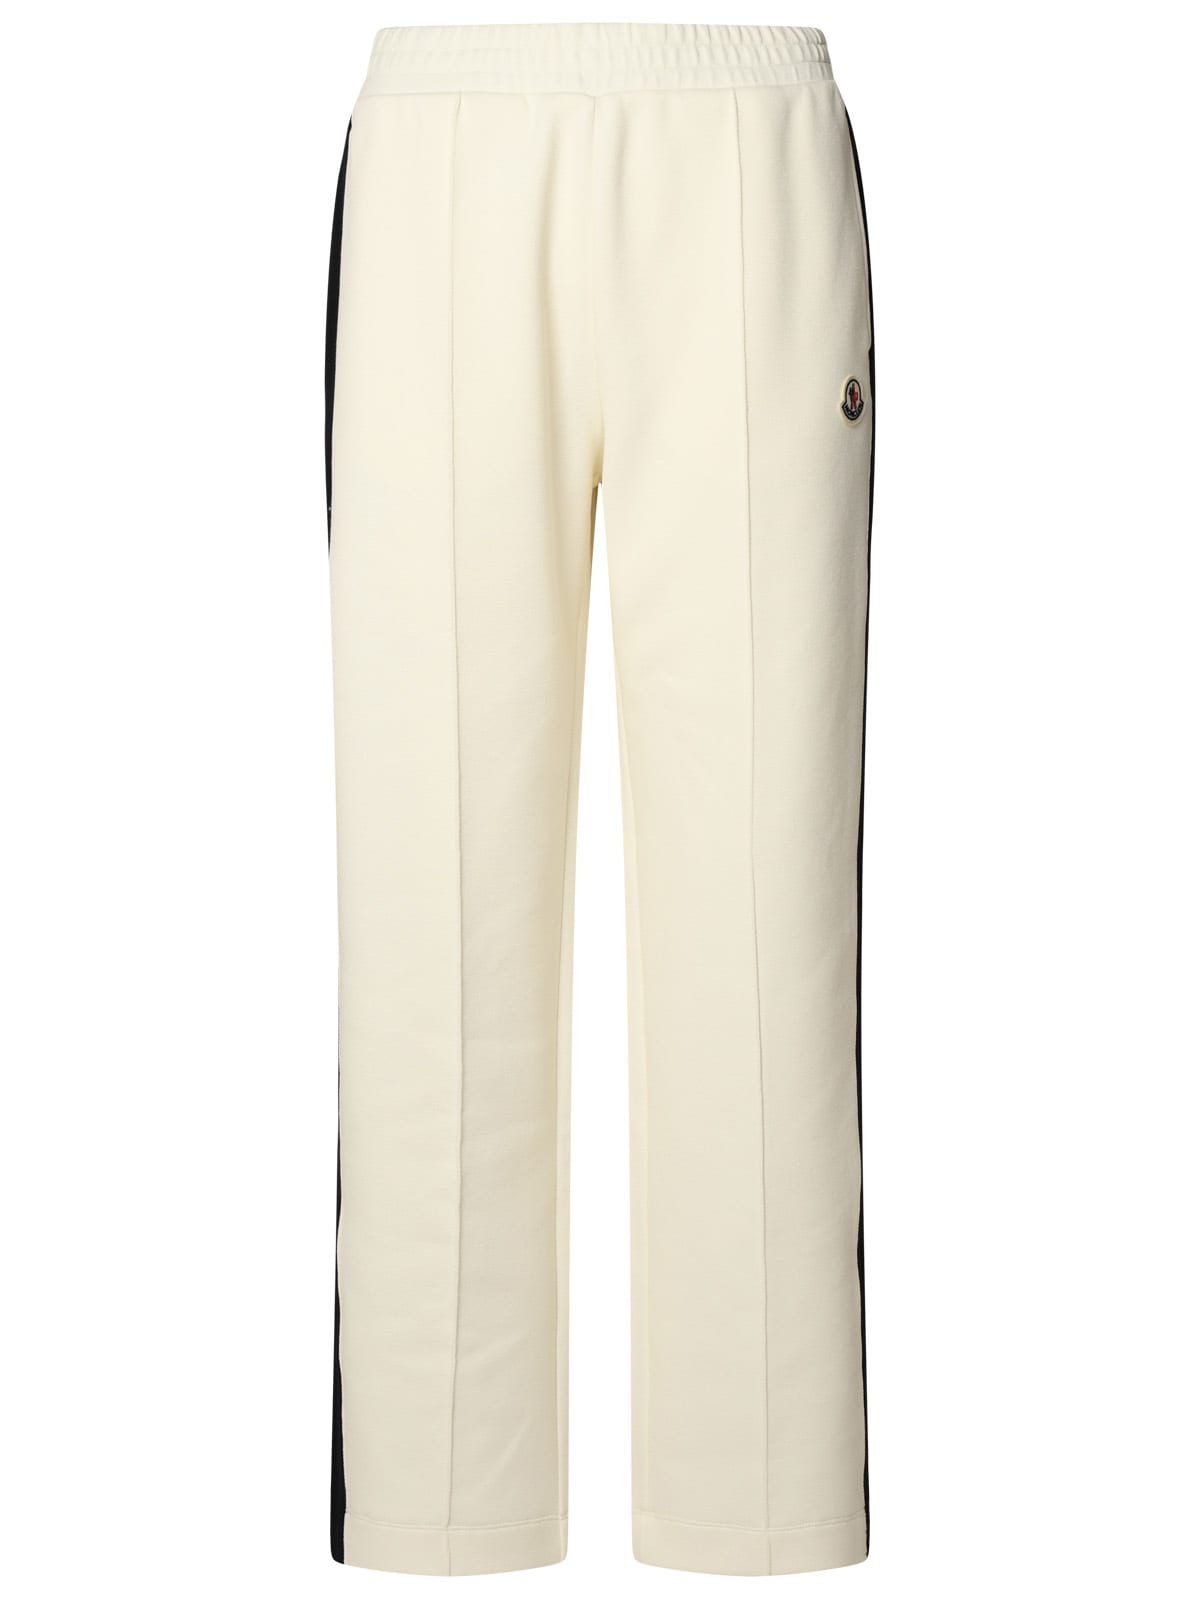 Ivory Cotton Blend Trousers